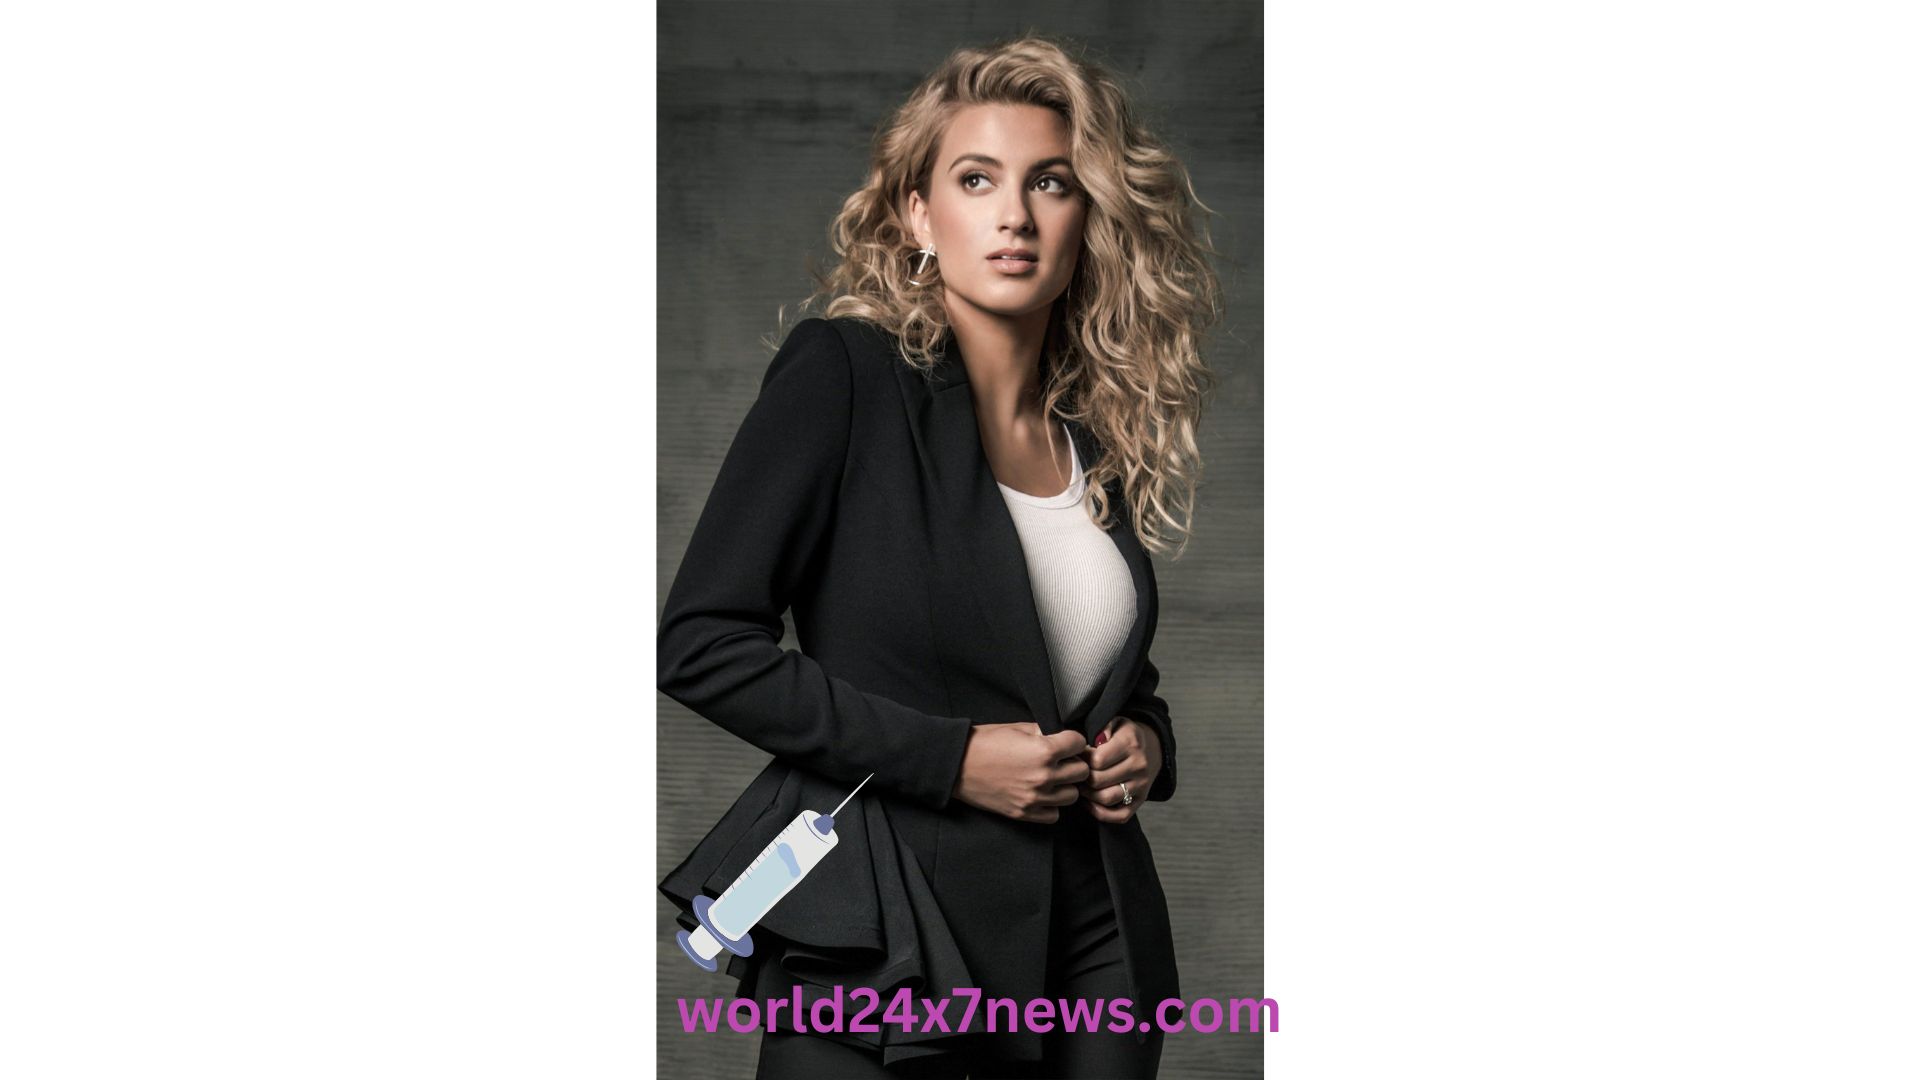 Tori Kelly's stay in the hospital because of a blood clot is sending shockwaves across the entertainment world. Considering that fans and well wishers are waiting for news about her condition, it's important to stay true to the importance of health no matter what your status or fame